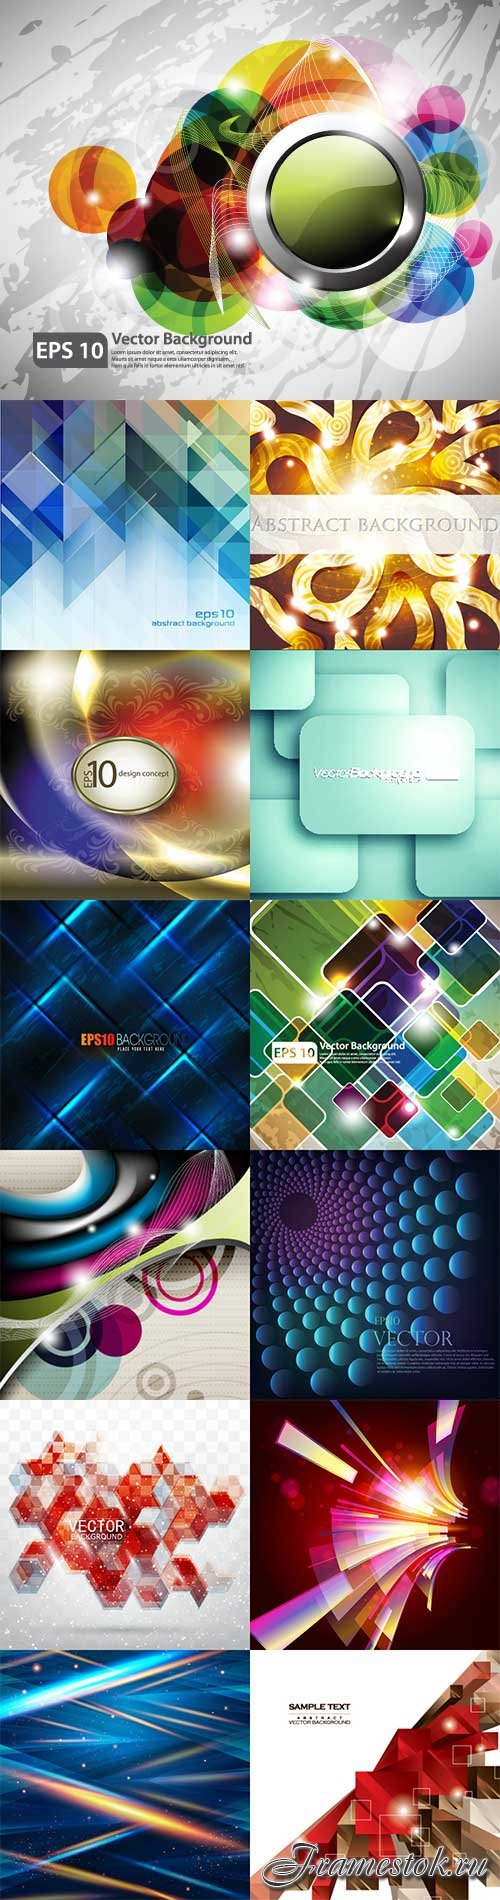 Bright colorful abstract backgrounds vector -59